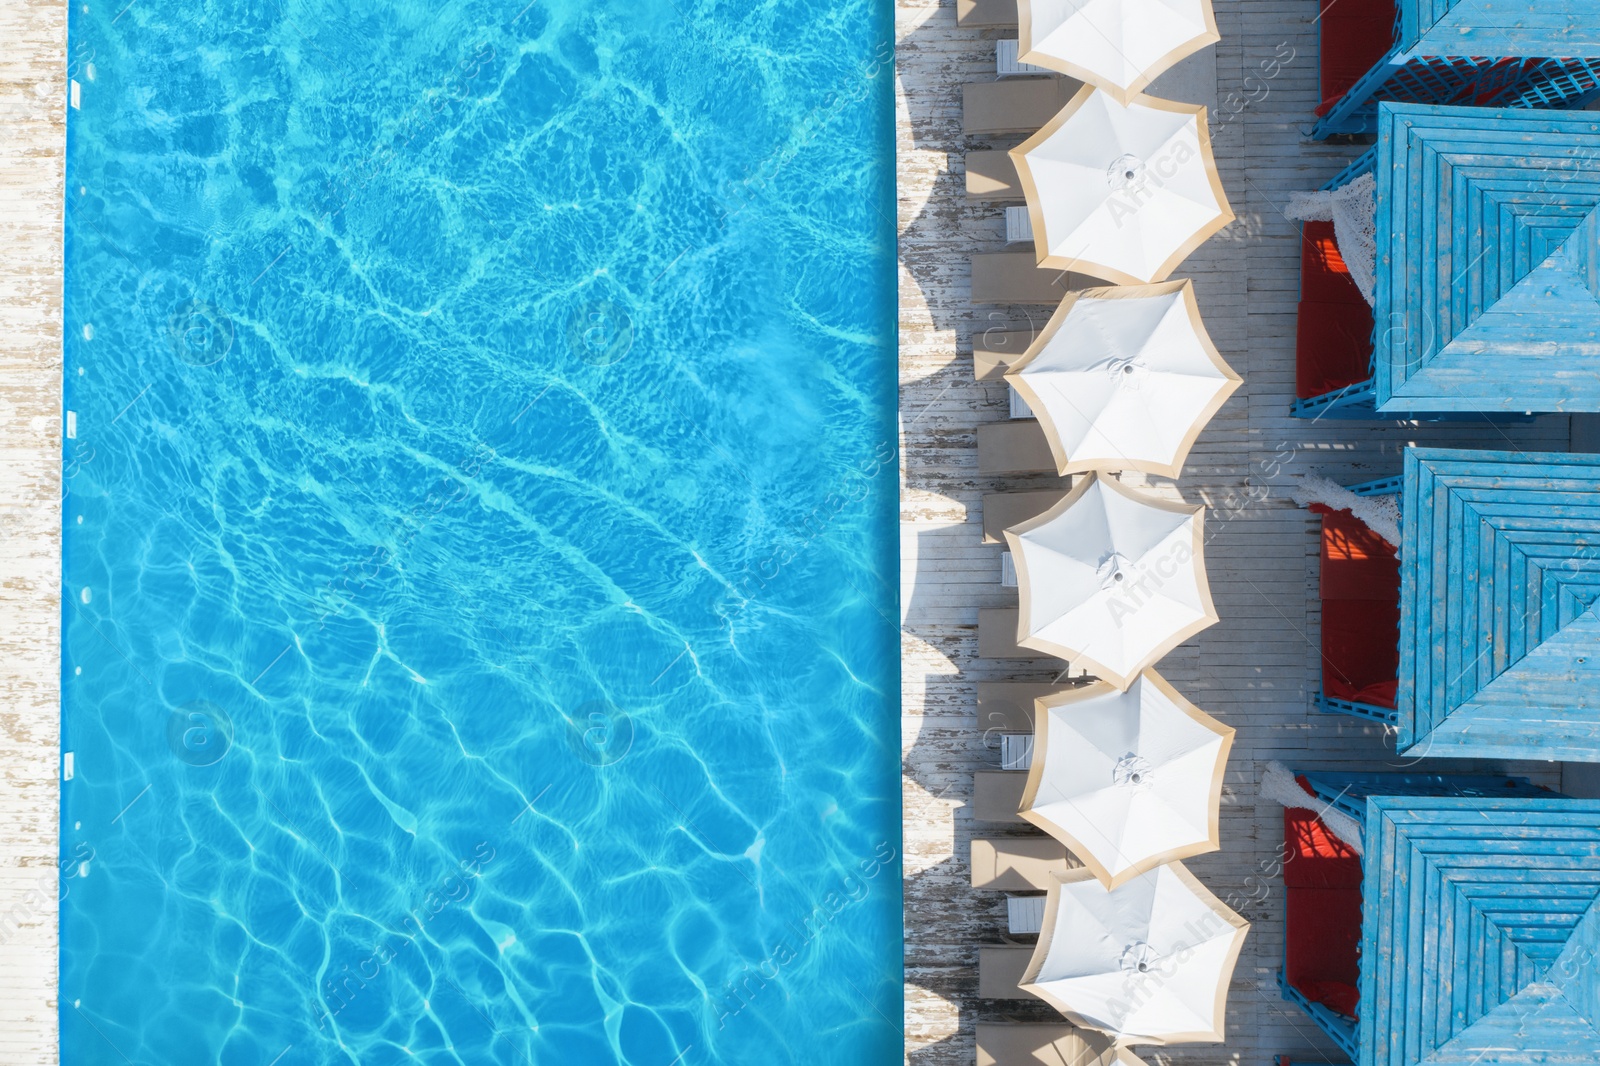 Image of Lounge chairs with umbrellas near swimming pool on sunny day, top view